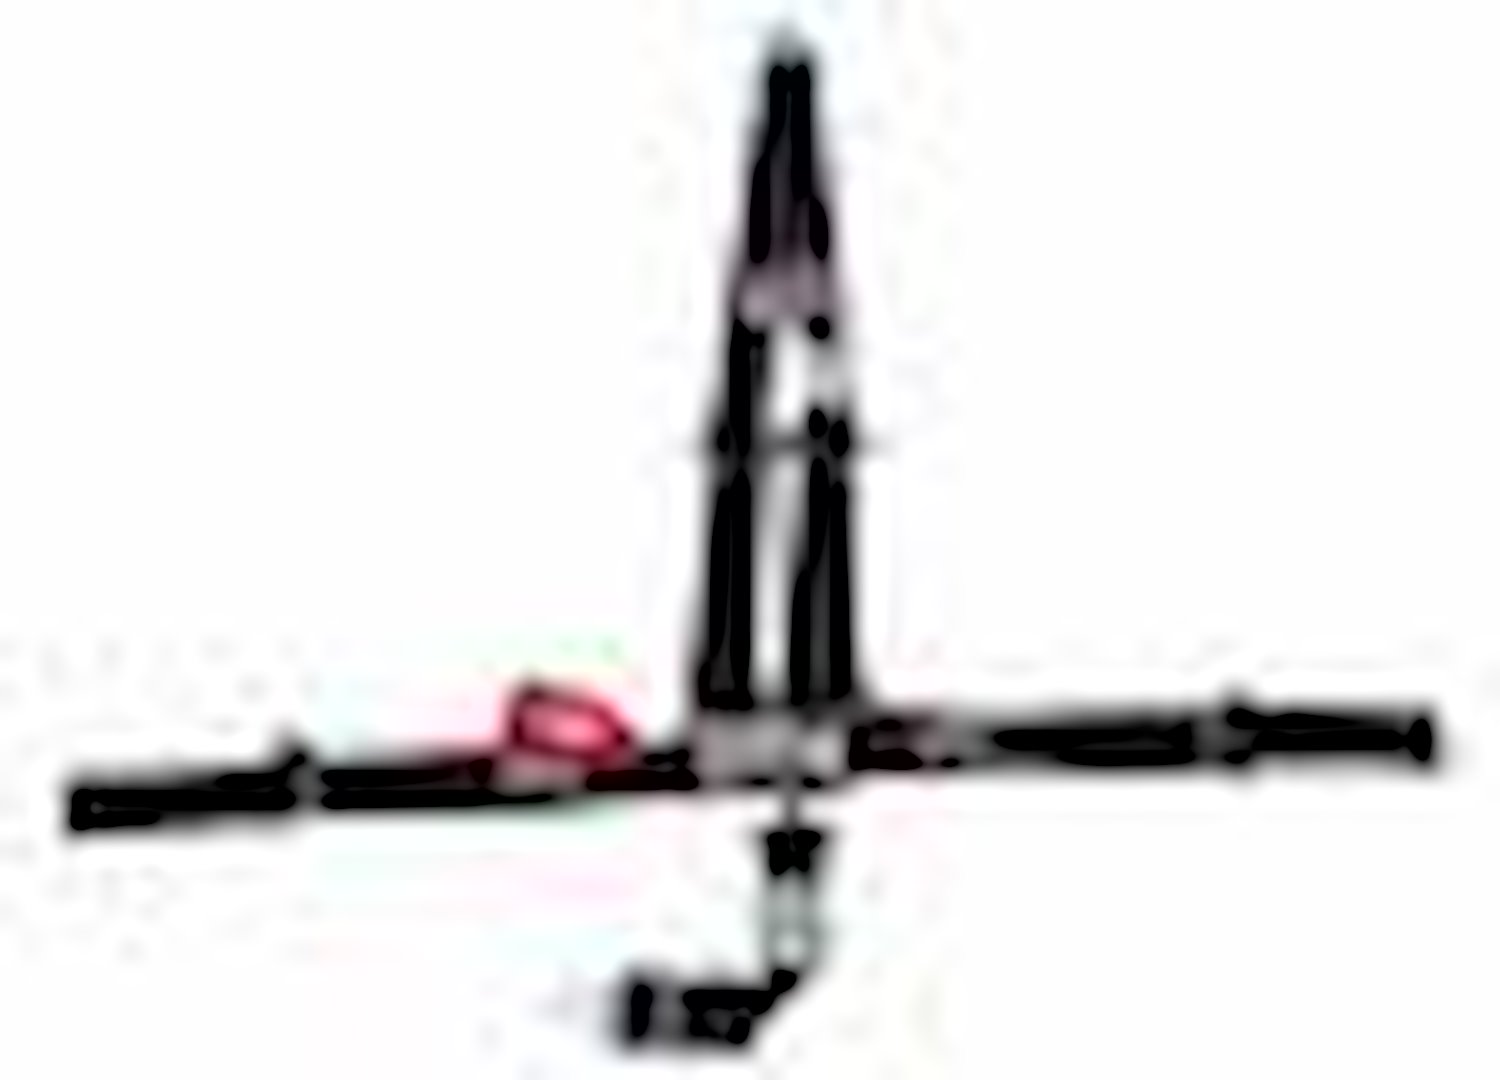 SFI 16.1 L&L HARNESS 2 PULL UP Lap Belt 2 Shoulder Harness Individual ROLL BAR Mount 2 DOUBLE Sub ALL WRAP/BOLT ENDS HOT PINK